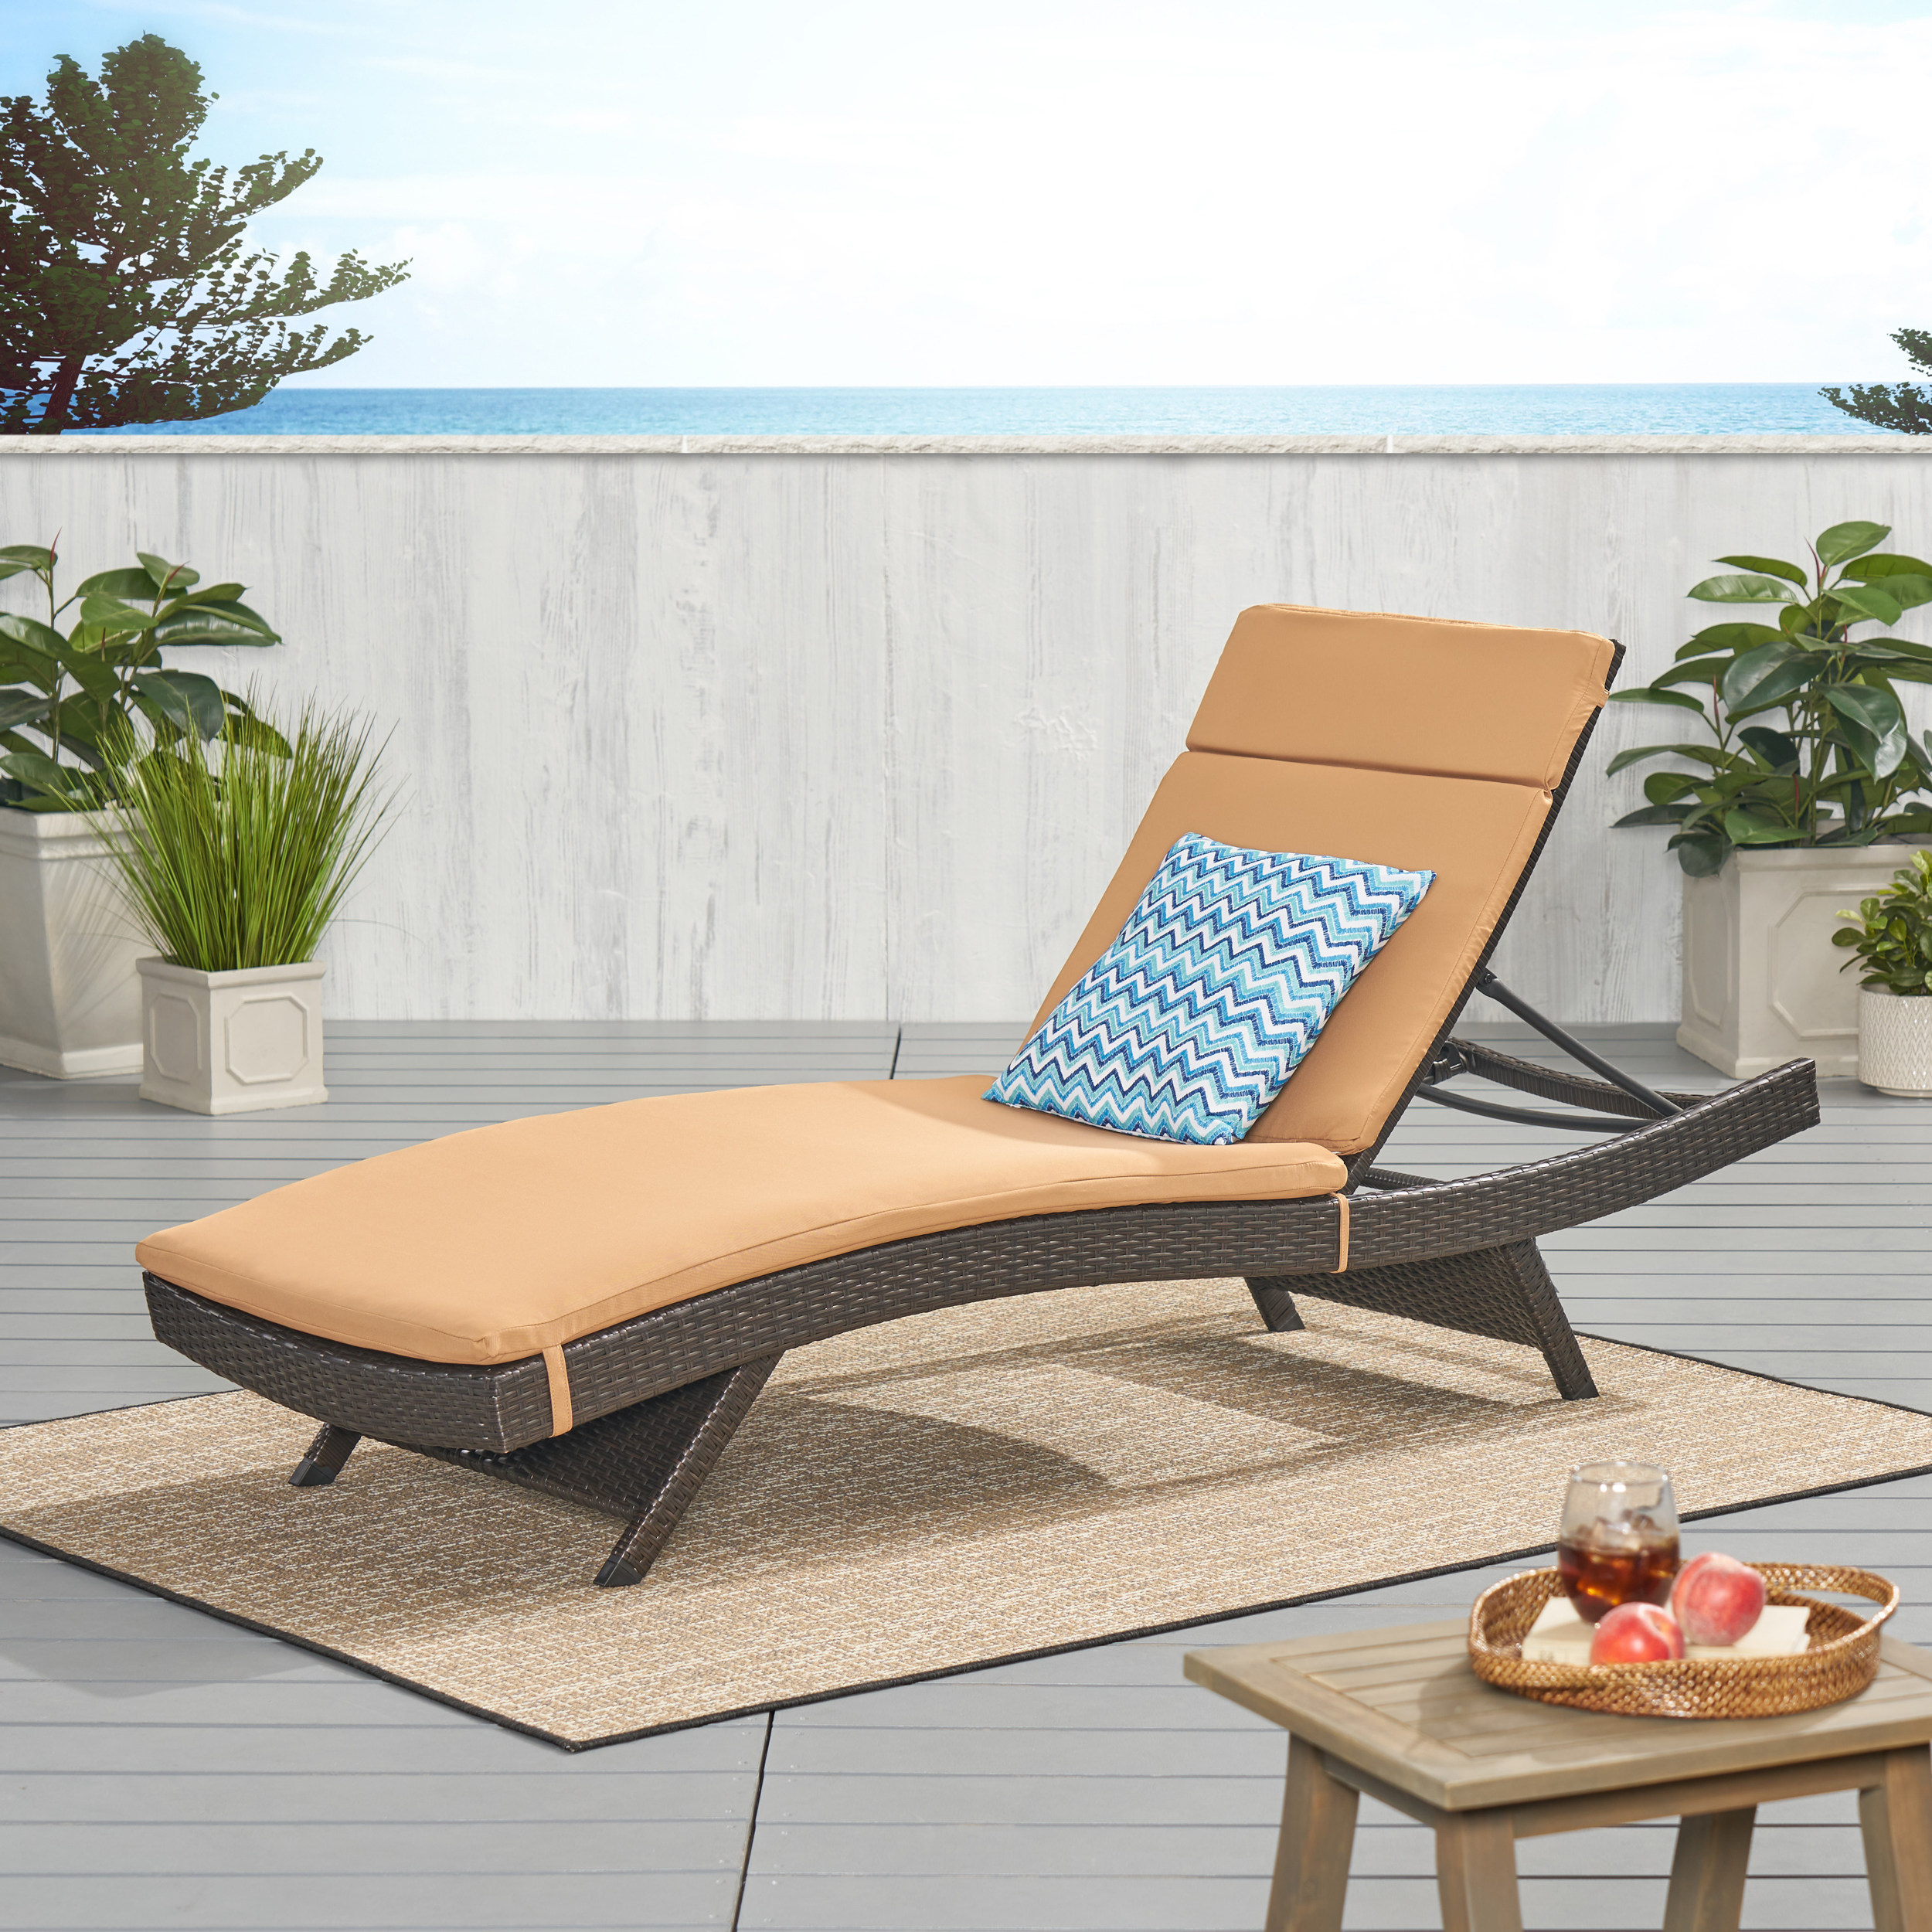 Lakeport Outdoor Adjustable Chaise Lounge Chair With Cushion - Caramel Cushion